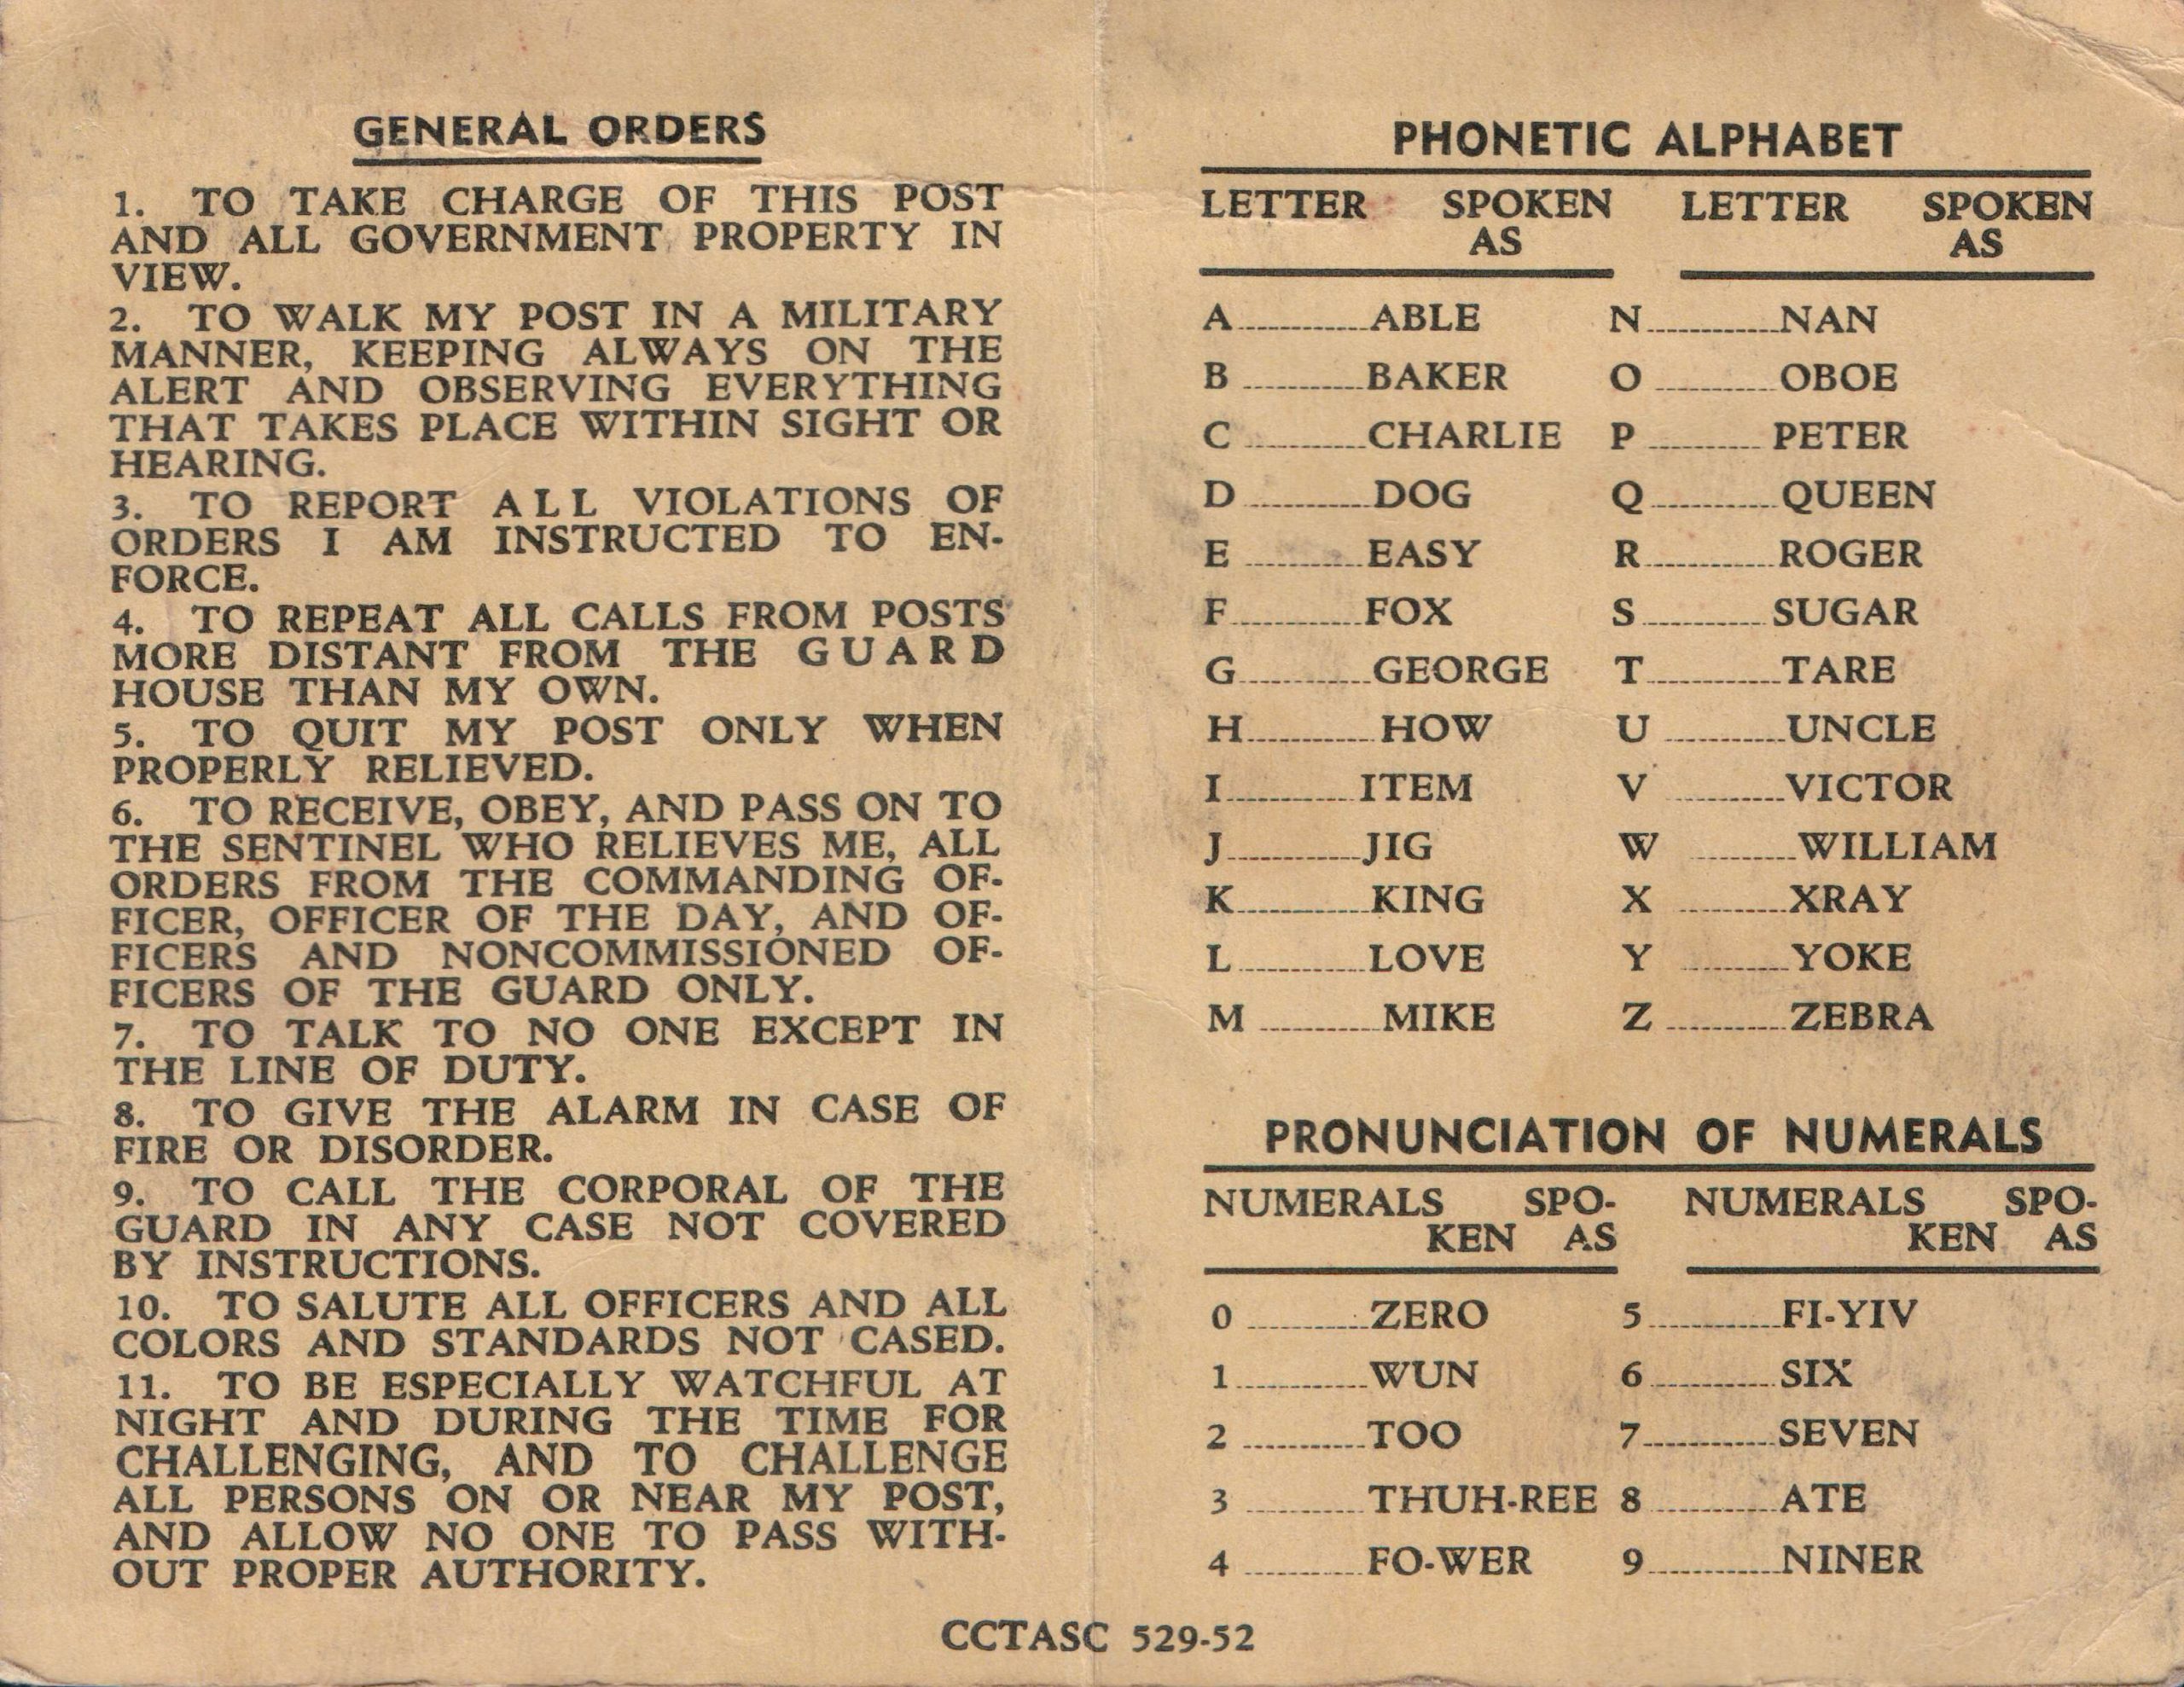 Front of General Information Card